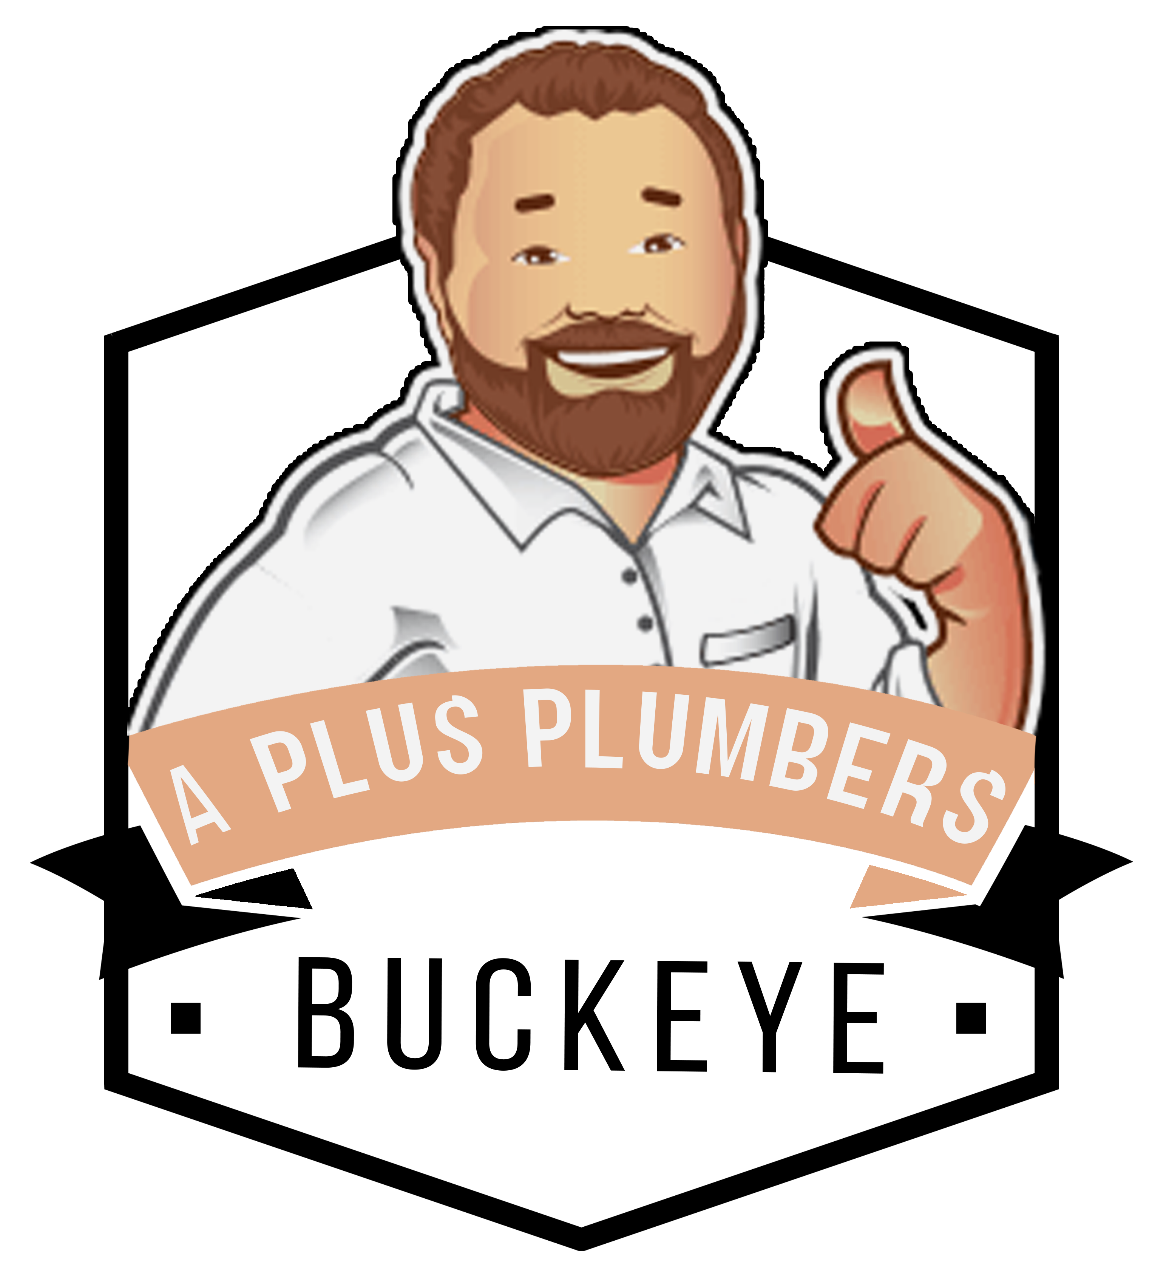 Looking for services in. Plumber clipart plumbing service